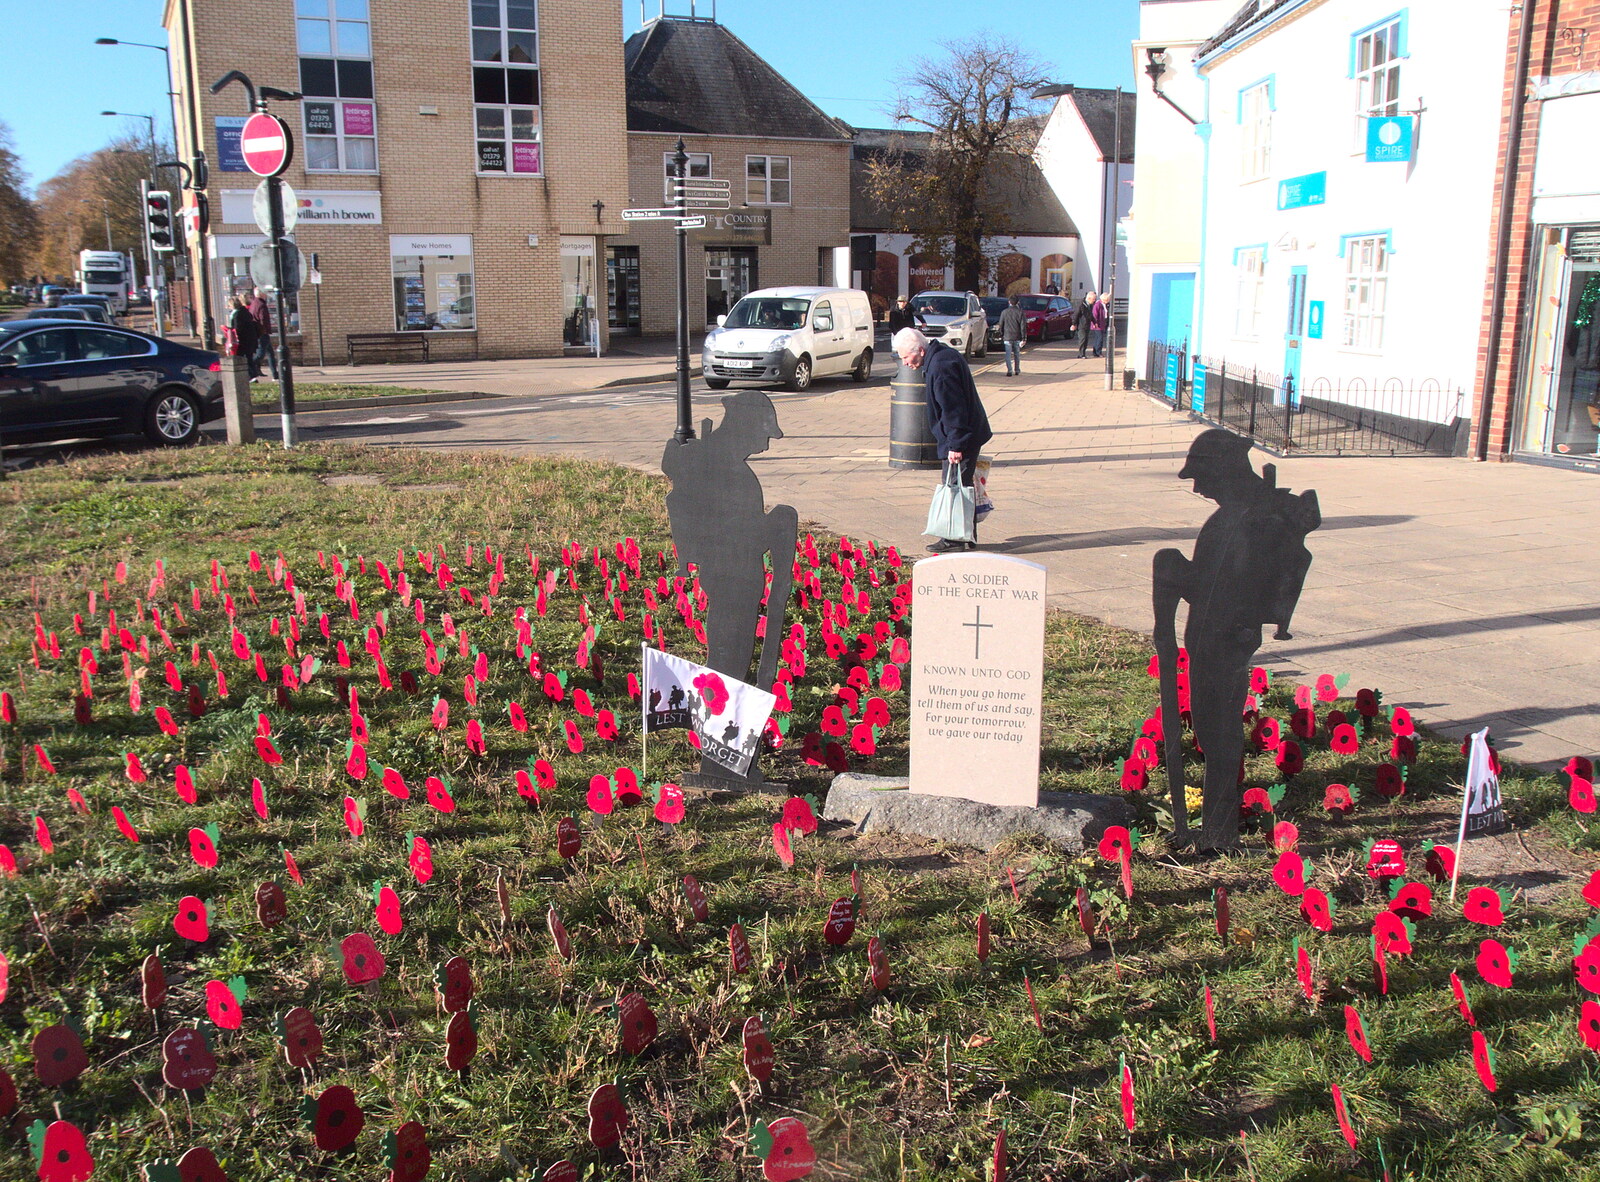 There's a poppy memorial for the Great War in Diss from Suey Leaves Aspall, The Oaksmere, Brome, Suffolk - 16th November 2018